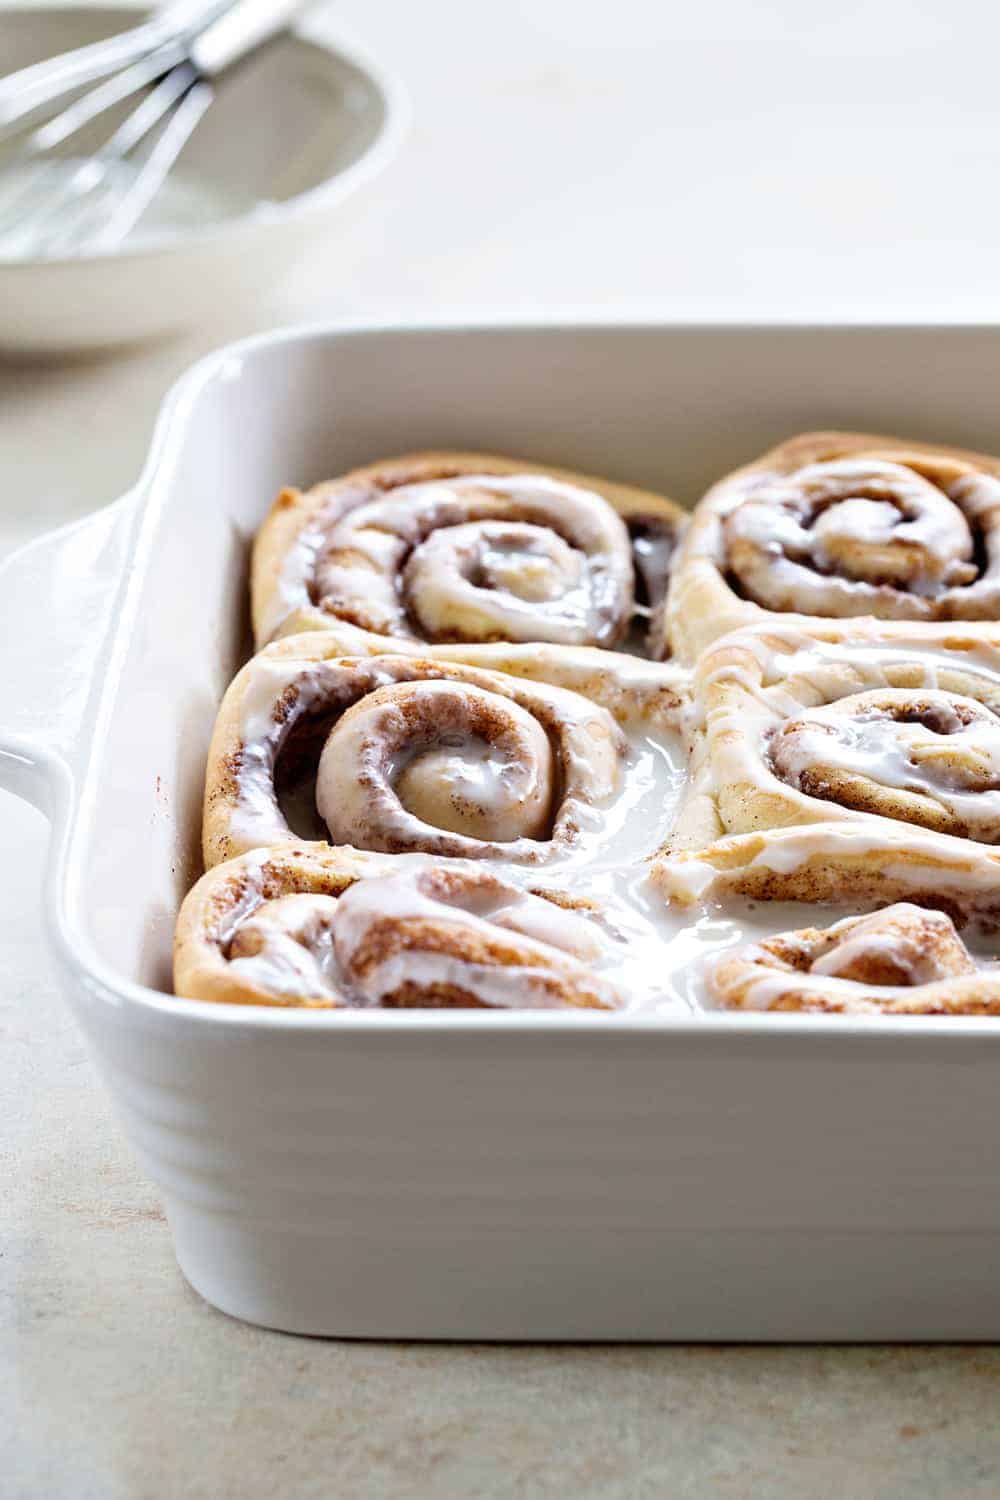 Overnight Chai Spice Sweet Rolls are the perfect breakfast for Christmas morning. Make them the night before and let them rise while you're opening gifts. Who could resist?